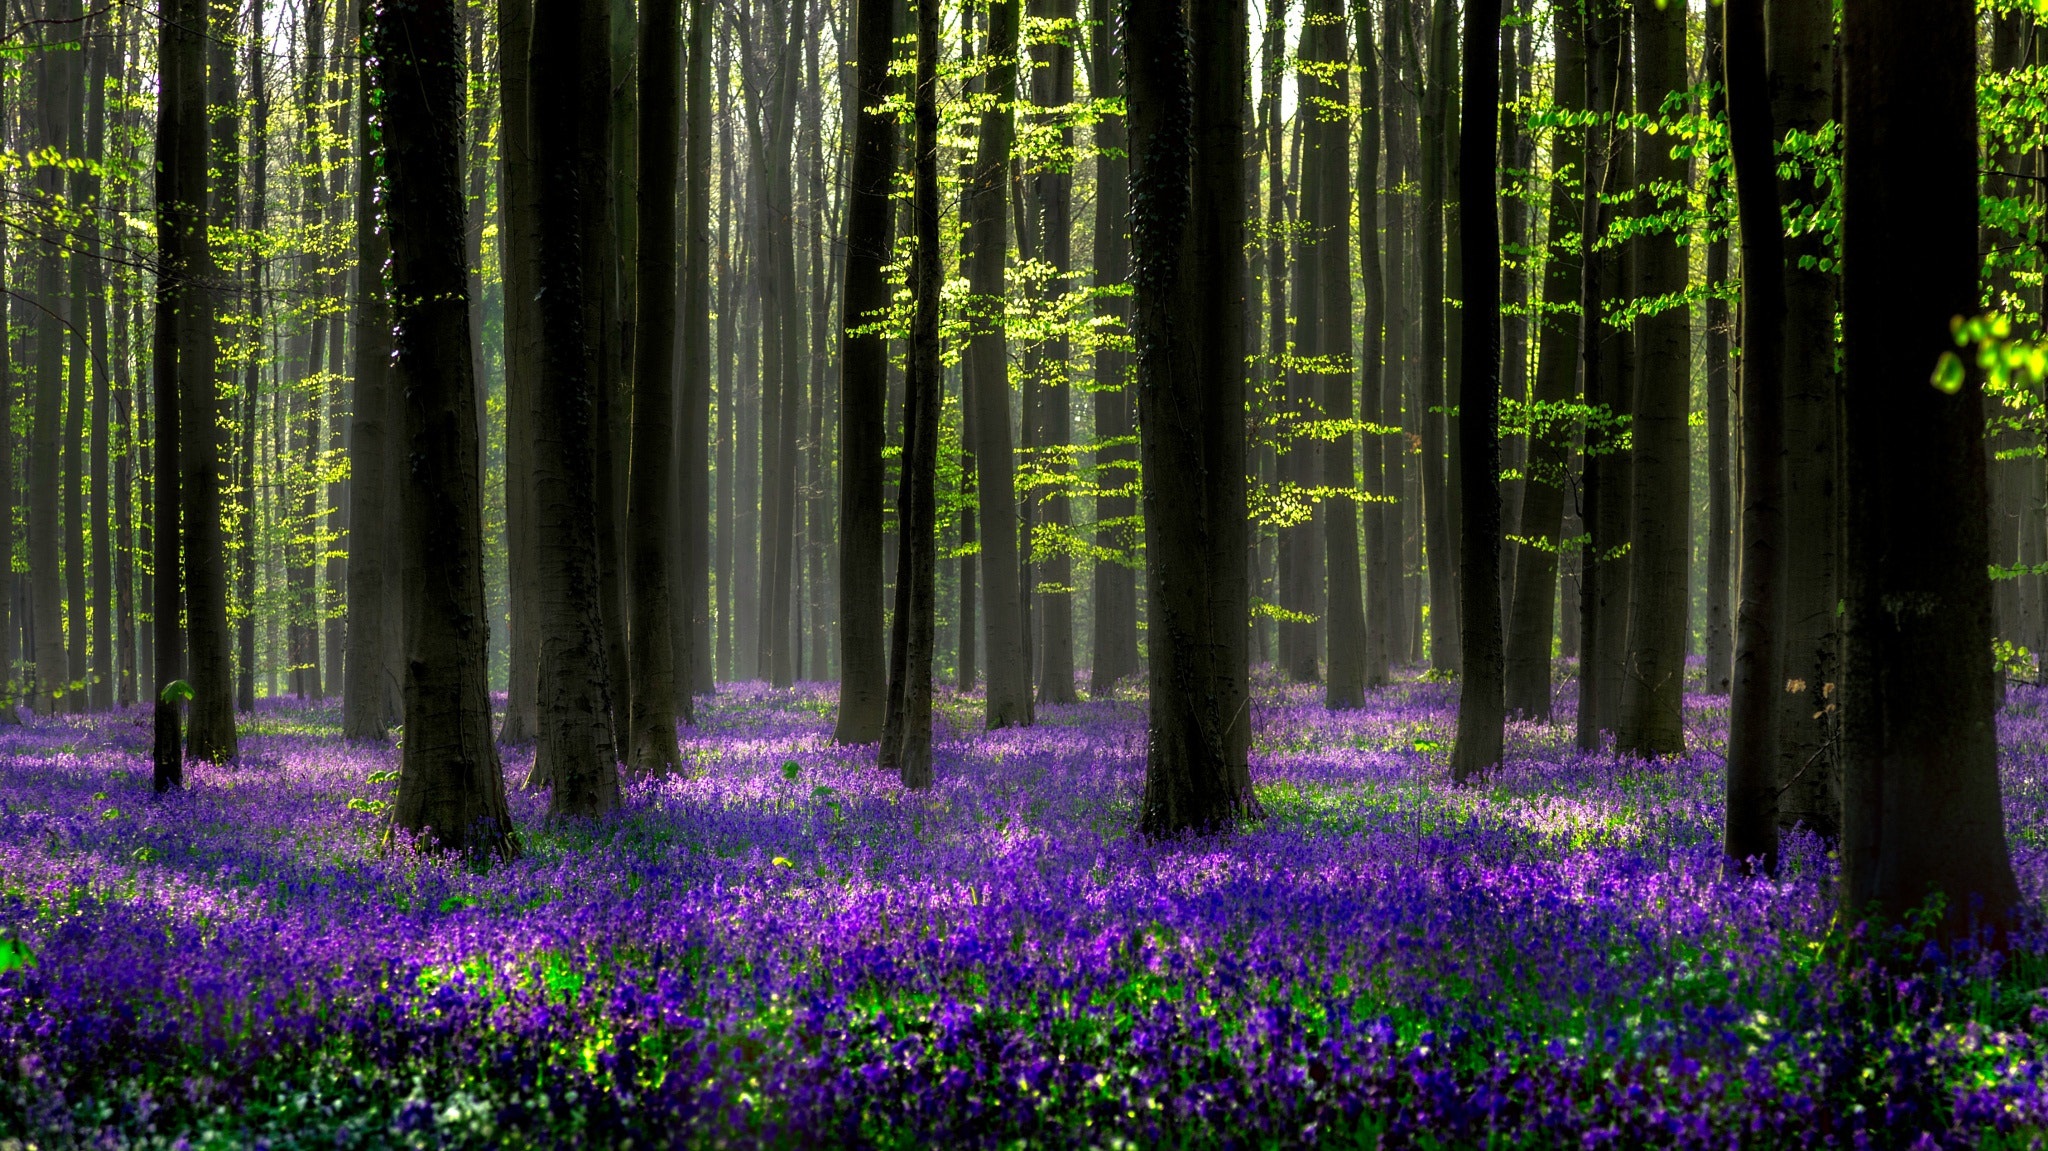 earth, hyacinth, flower, forest, nature, purple flower, spring, flowers